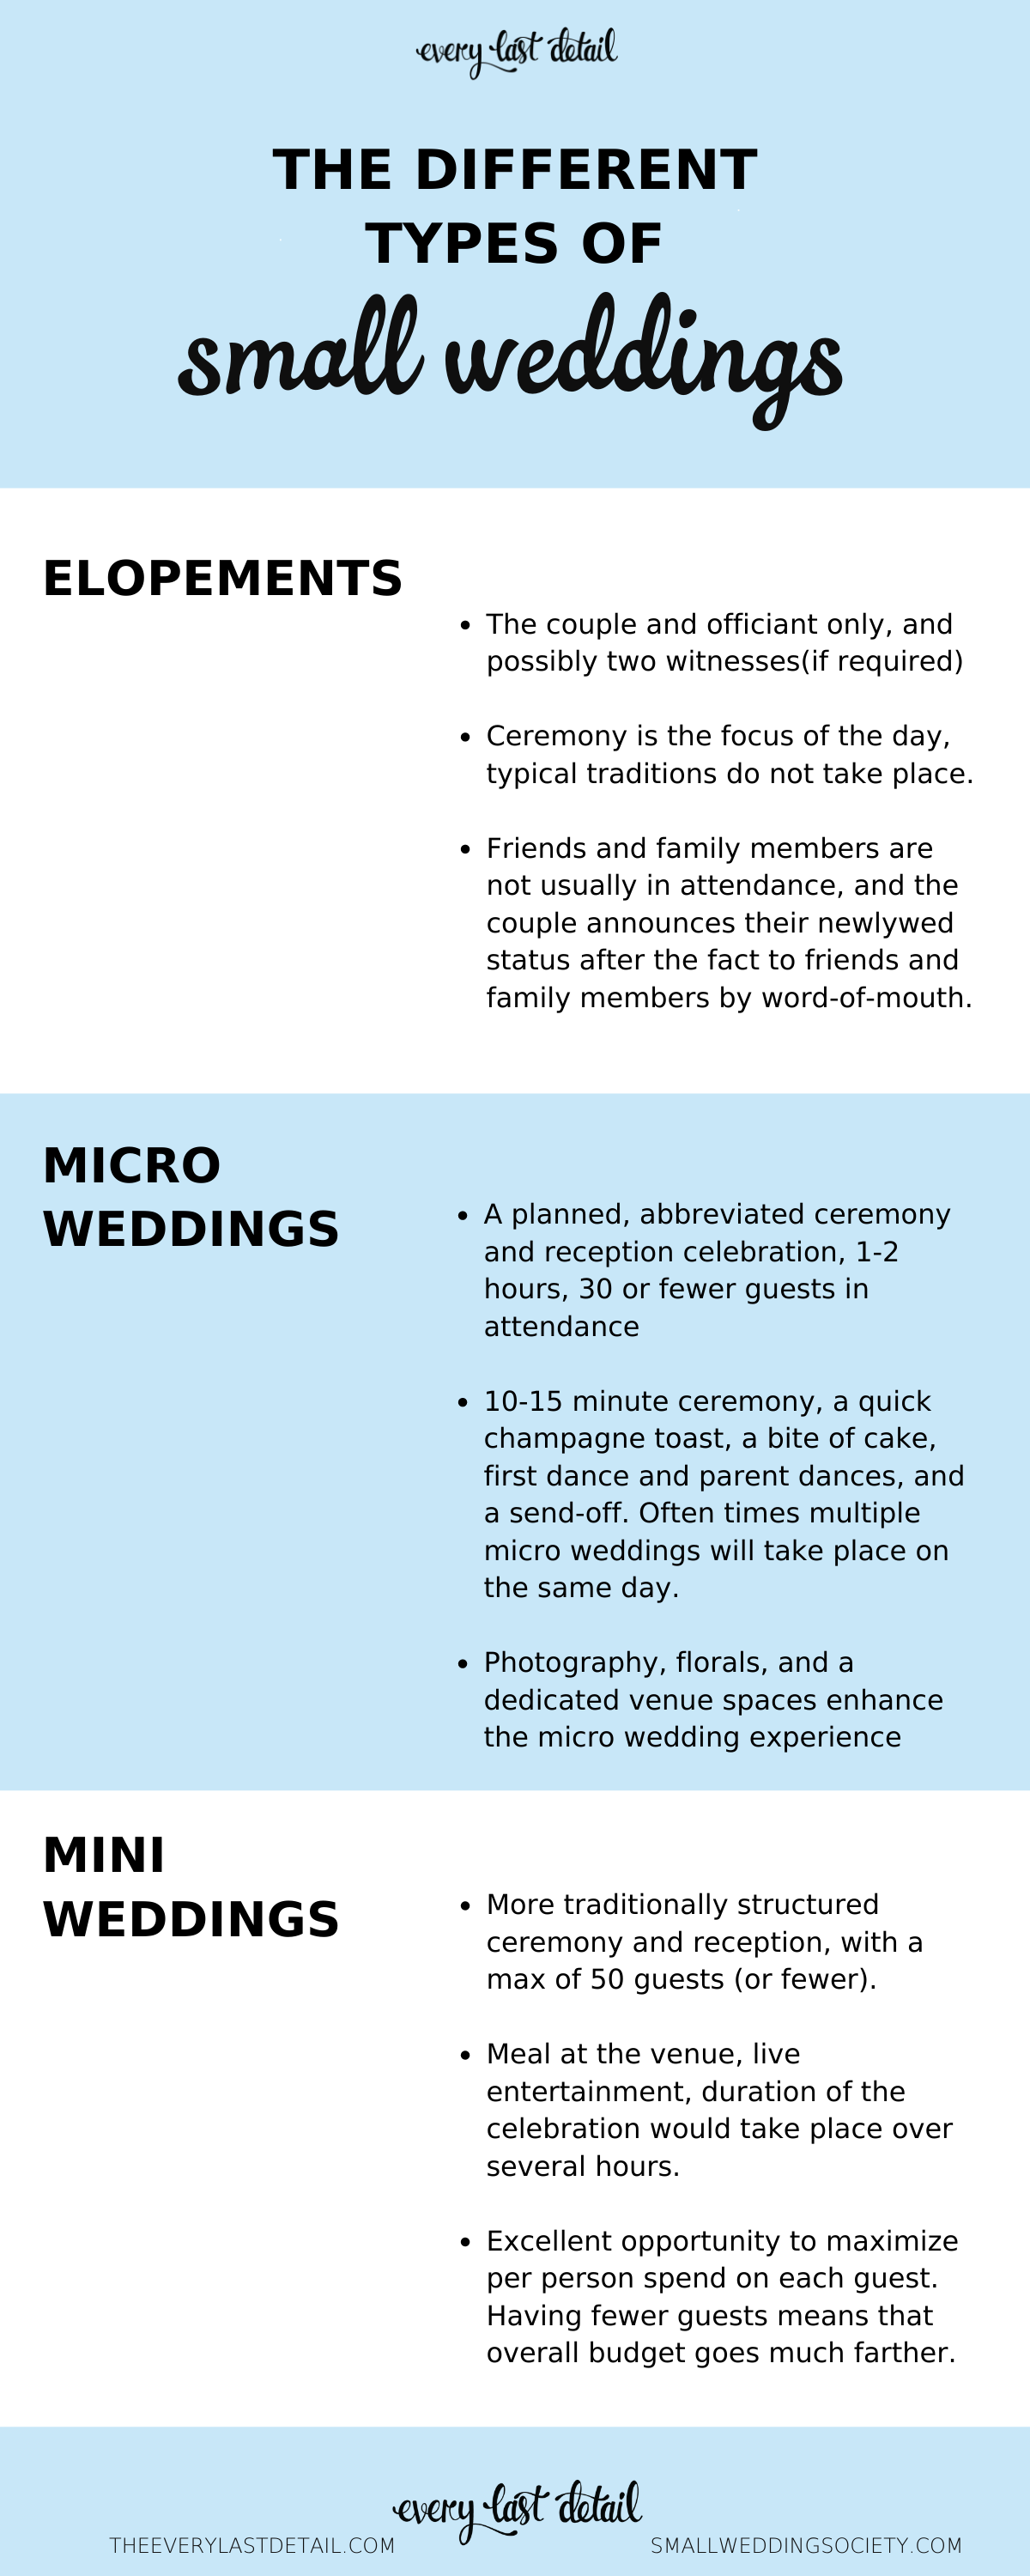 Considering a Small Wedding? Heres What You Need To Know! via TheELD.com